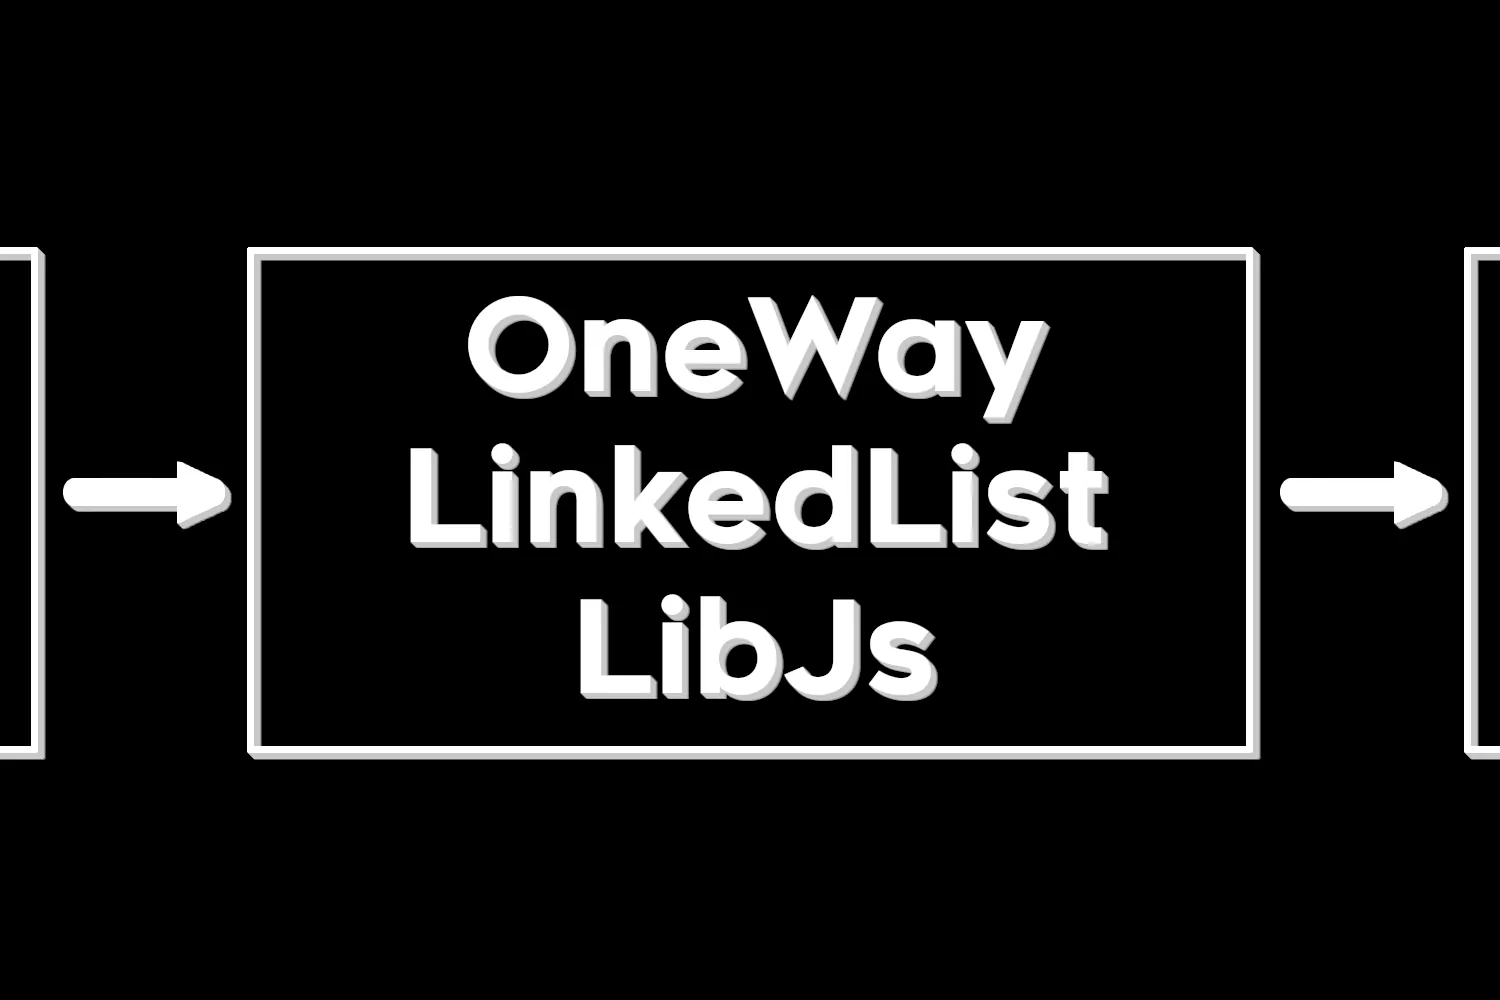 A logo displaying a linked list with the name "OneWayLinkedListLibJs" displayed in the center of the one of the nodes